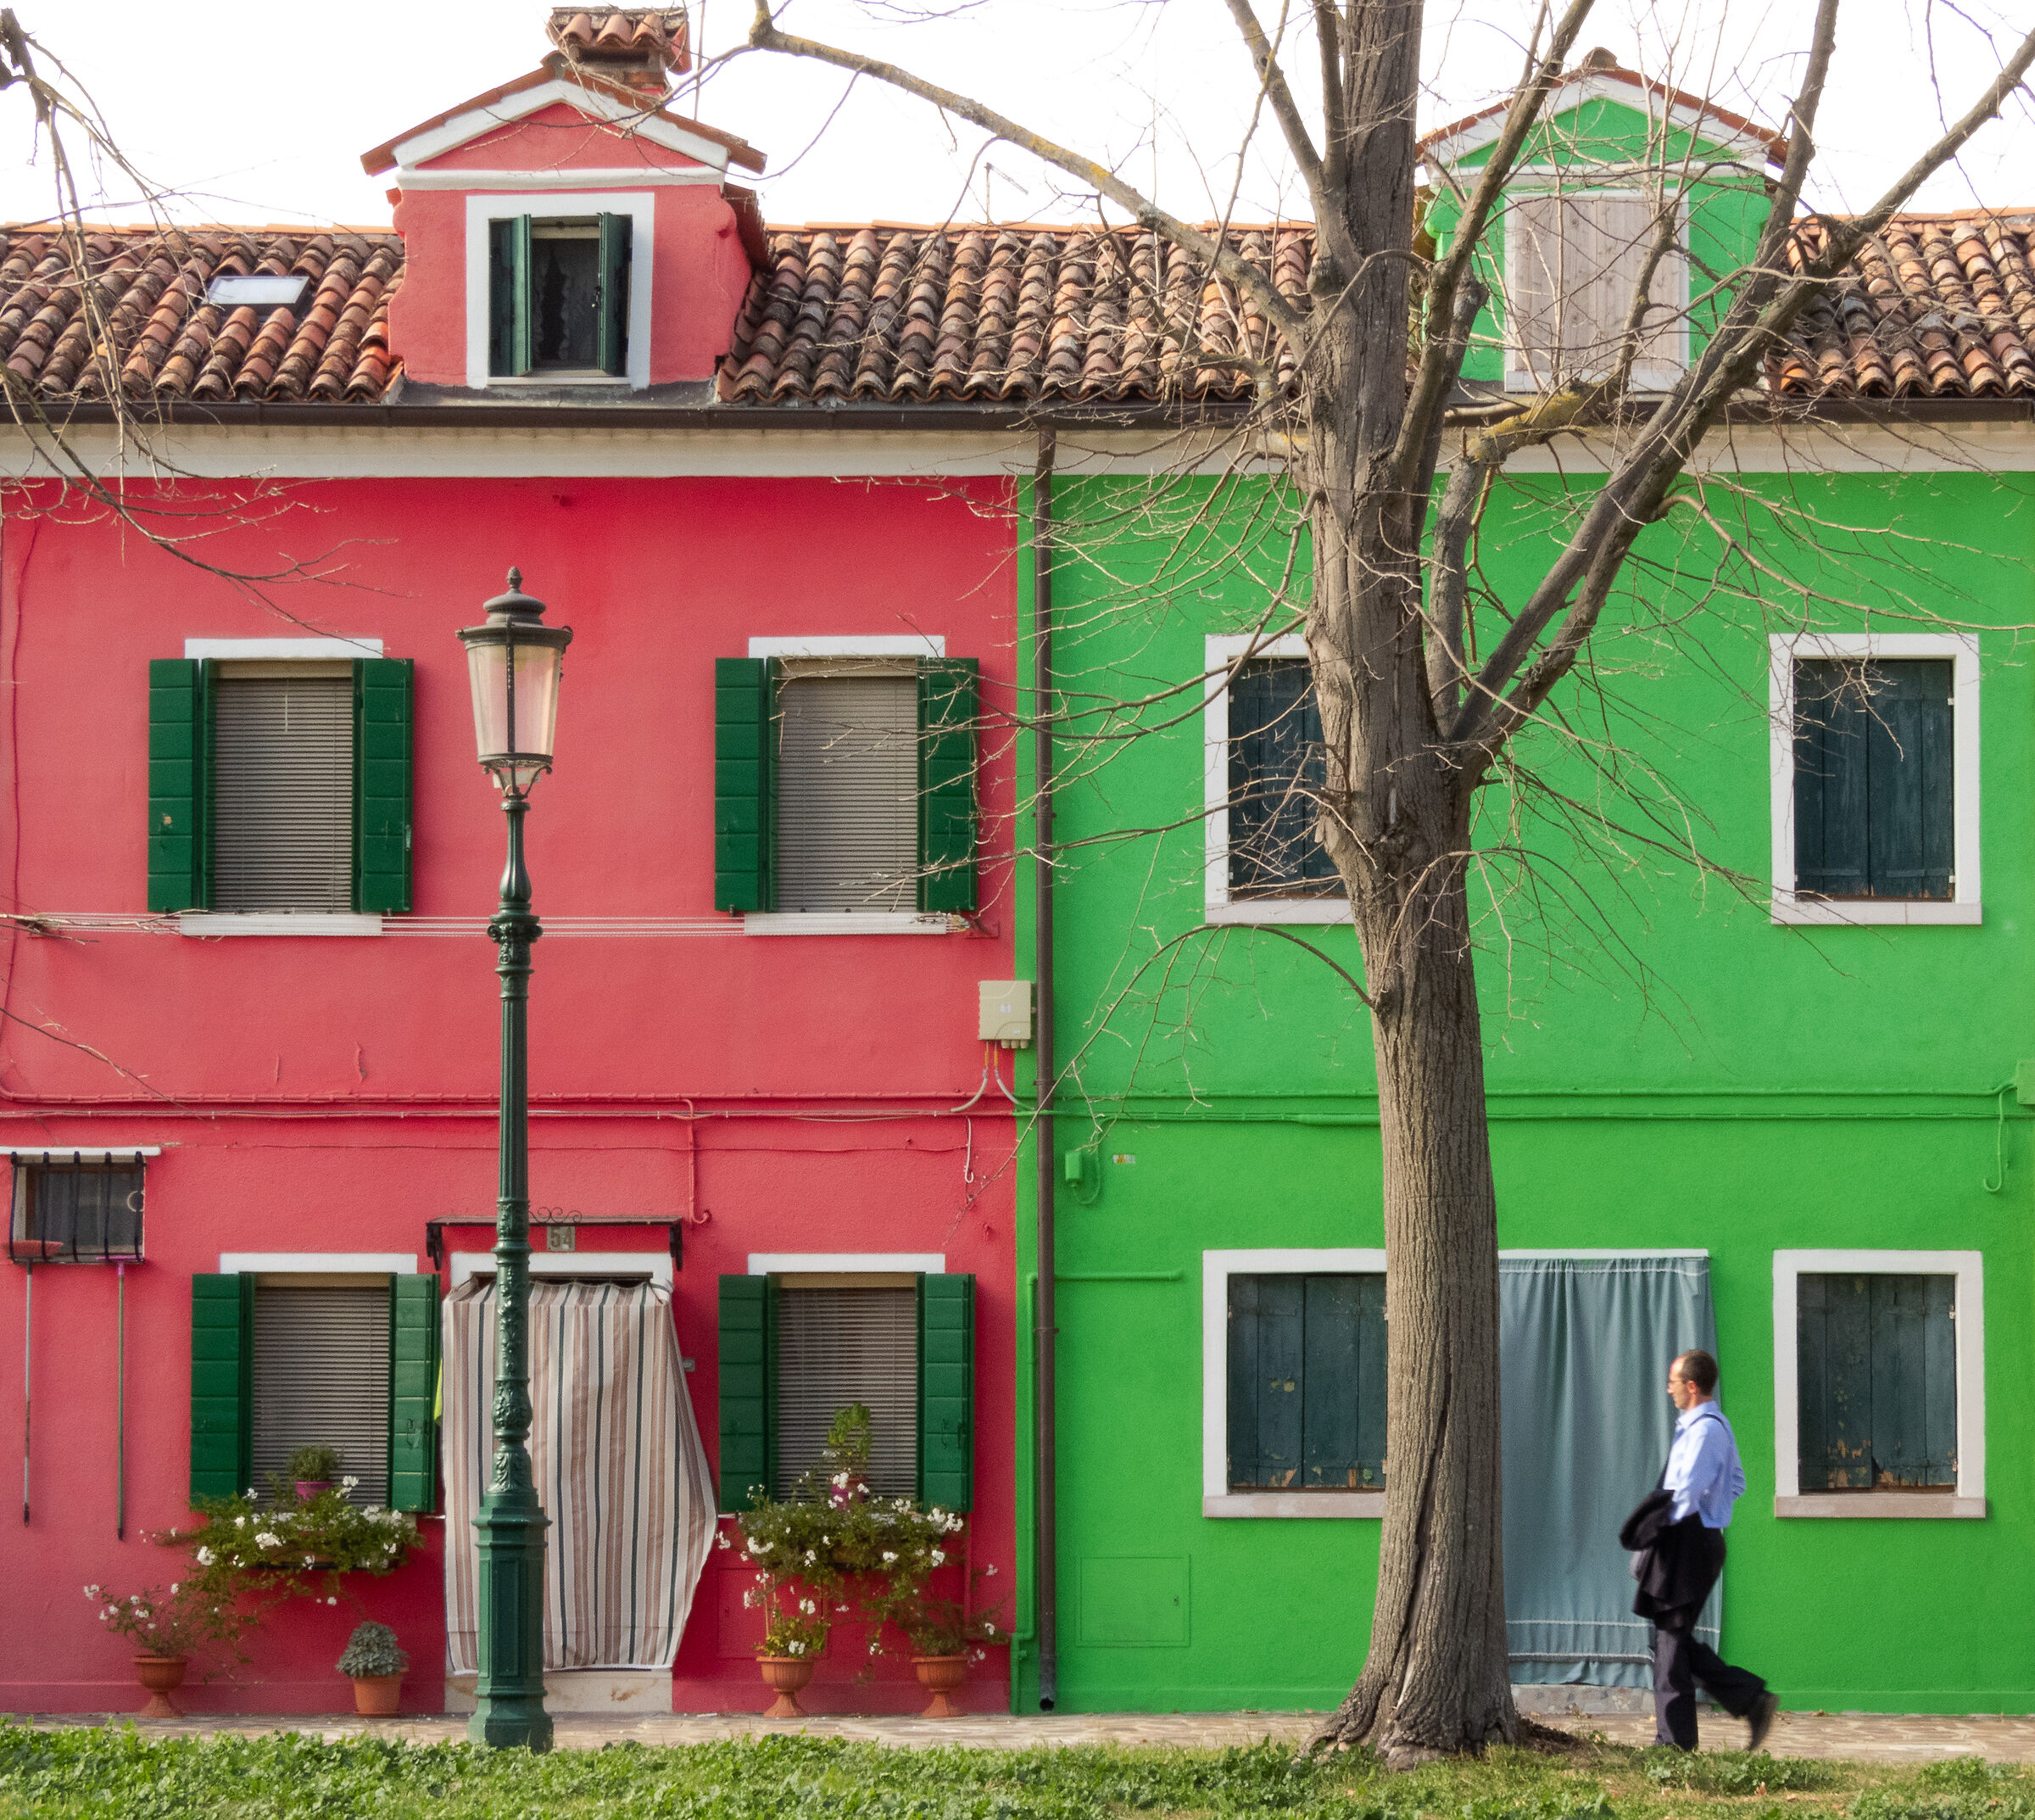 The houses of Burano...